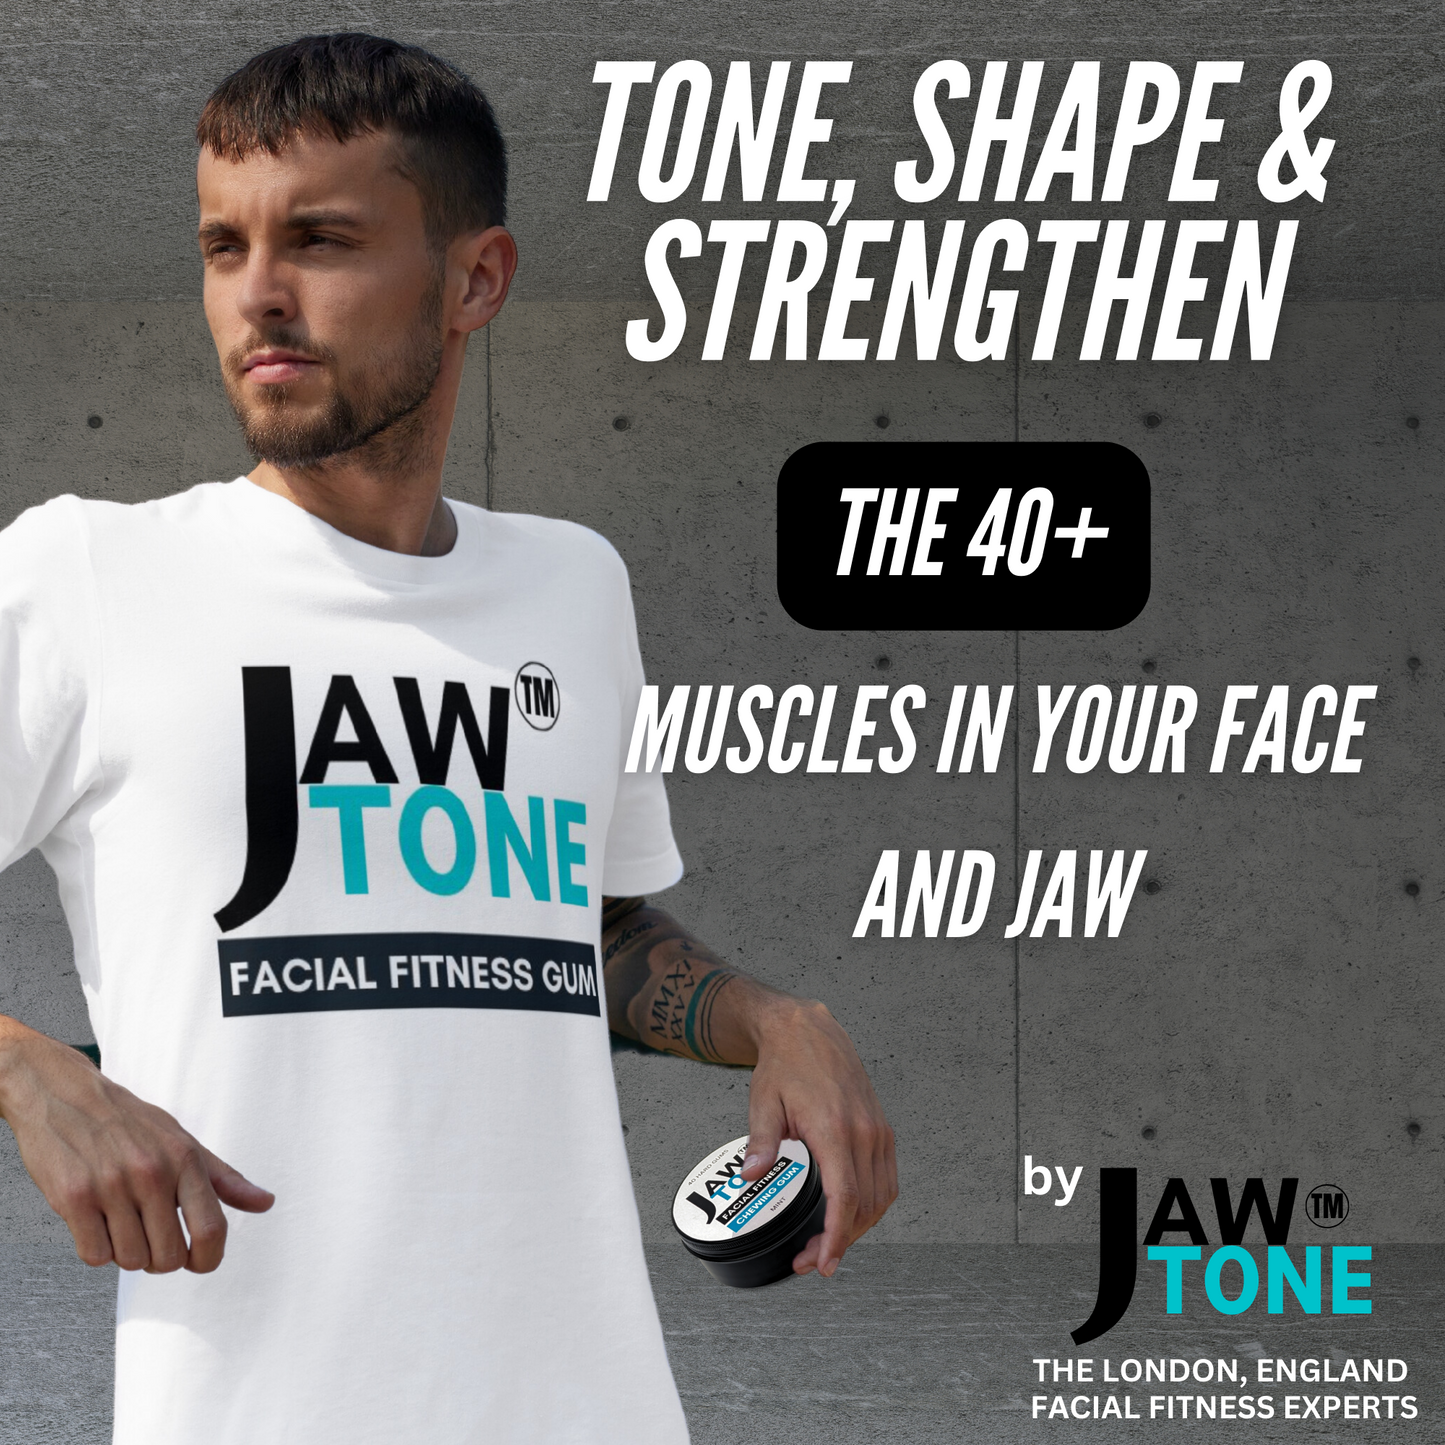 JawTone™ - 12X Hard Jawline gum (2 month supply) mint formulated for Jawline and Facial Fitness - mastic style gum VEGAN Xylitol Sweetened